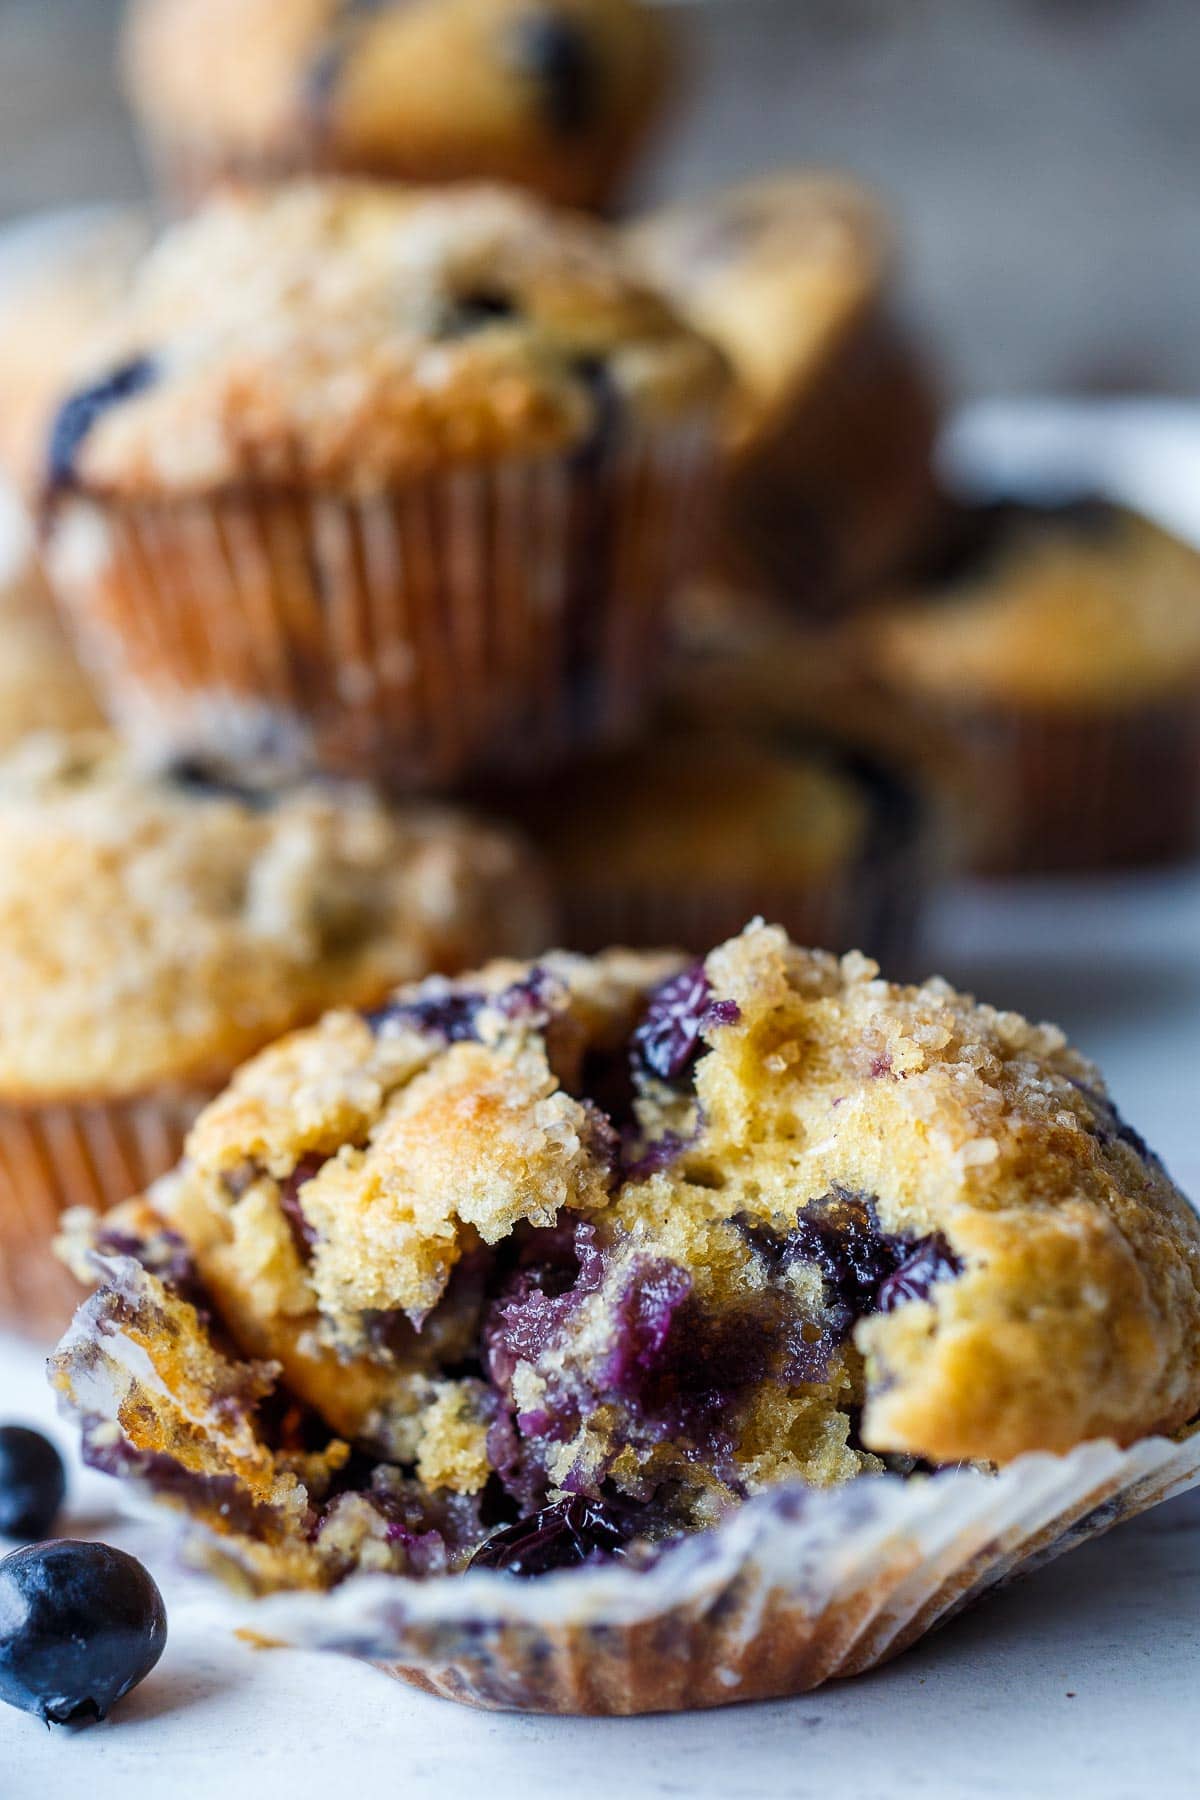 The core is formed by tender blueberry muffins with lemon, vanilla and cardamom. 